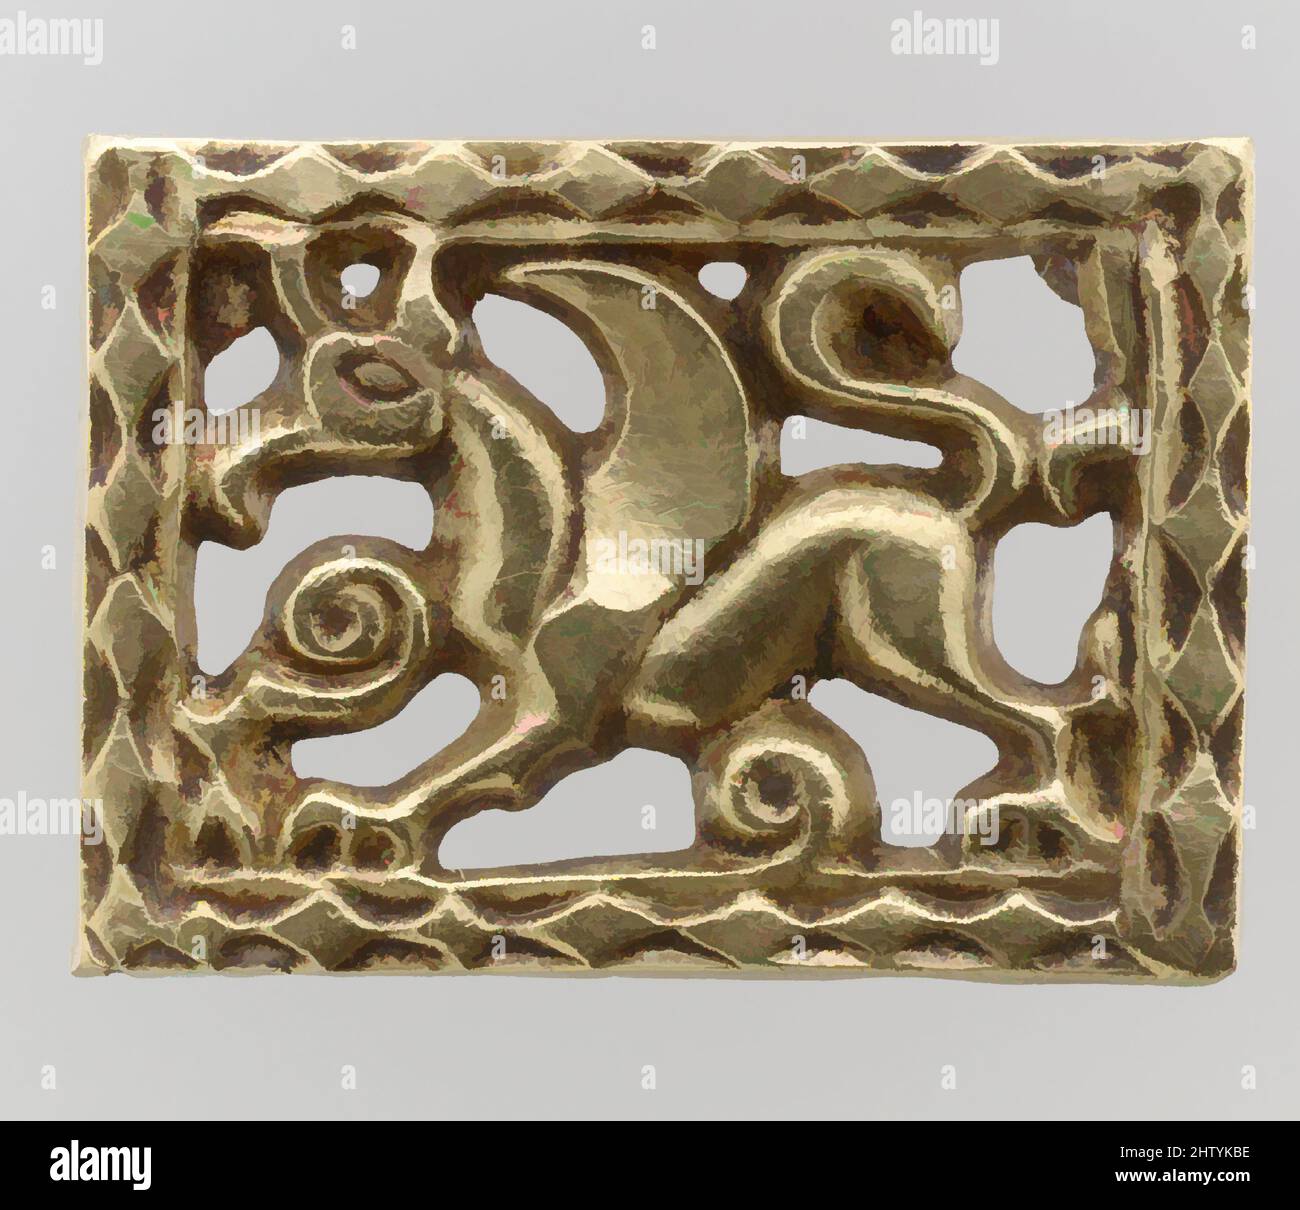 Art inspired by Gold Openwork Belt Mount, 700s, Avar, Gold, 2 1/8 × 1 9/16 × 1/4 in., 1 Troy Ounces (5.4 × 3.9 × 0.6 cm, 38g), Metalwork-Gold, The treasure contains an array of belt fittings, some elaborately decorated, some unfinished or defectively cast. Some show no signs of use, Classic works modernized by Artotop with a splash of modernity. Shapes, color and value, eye-catching visual impact on art. Emotions through freedom of artworks in a contemporary way. A timeless message pursuing a wildly creative new direction. Artists turning to the digital medium and creating the Artotop NFT Stock Photo